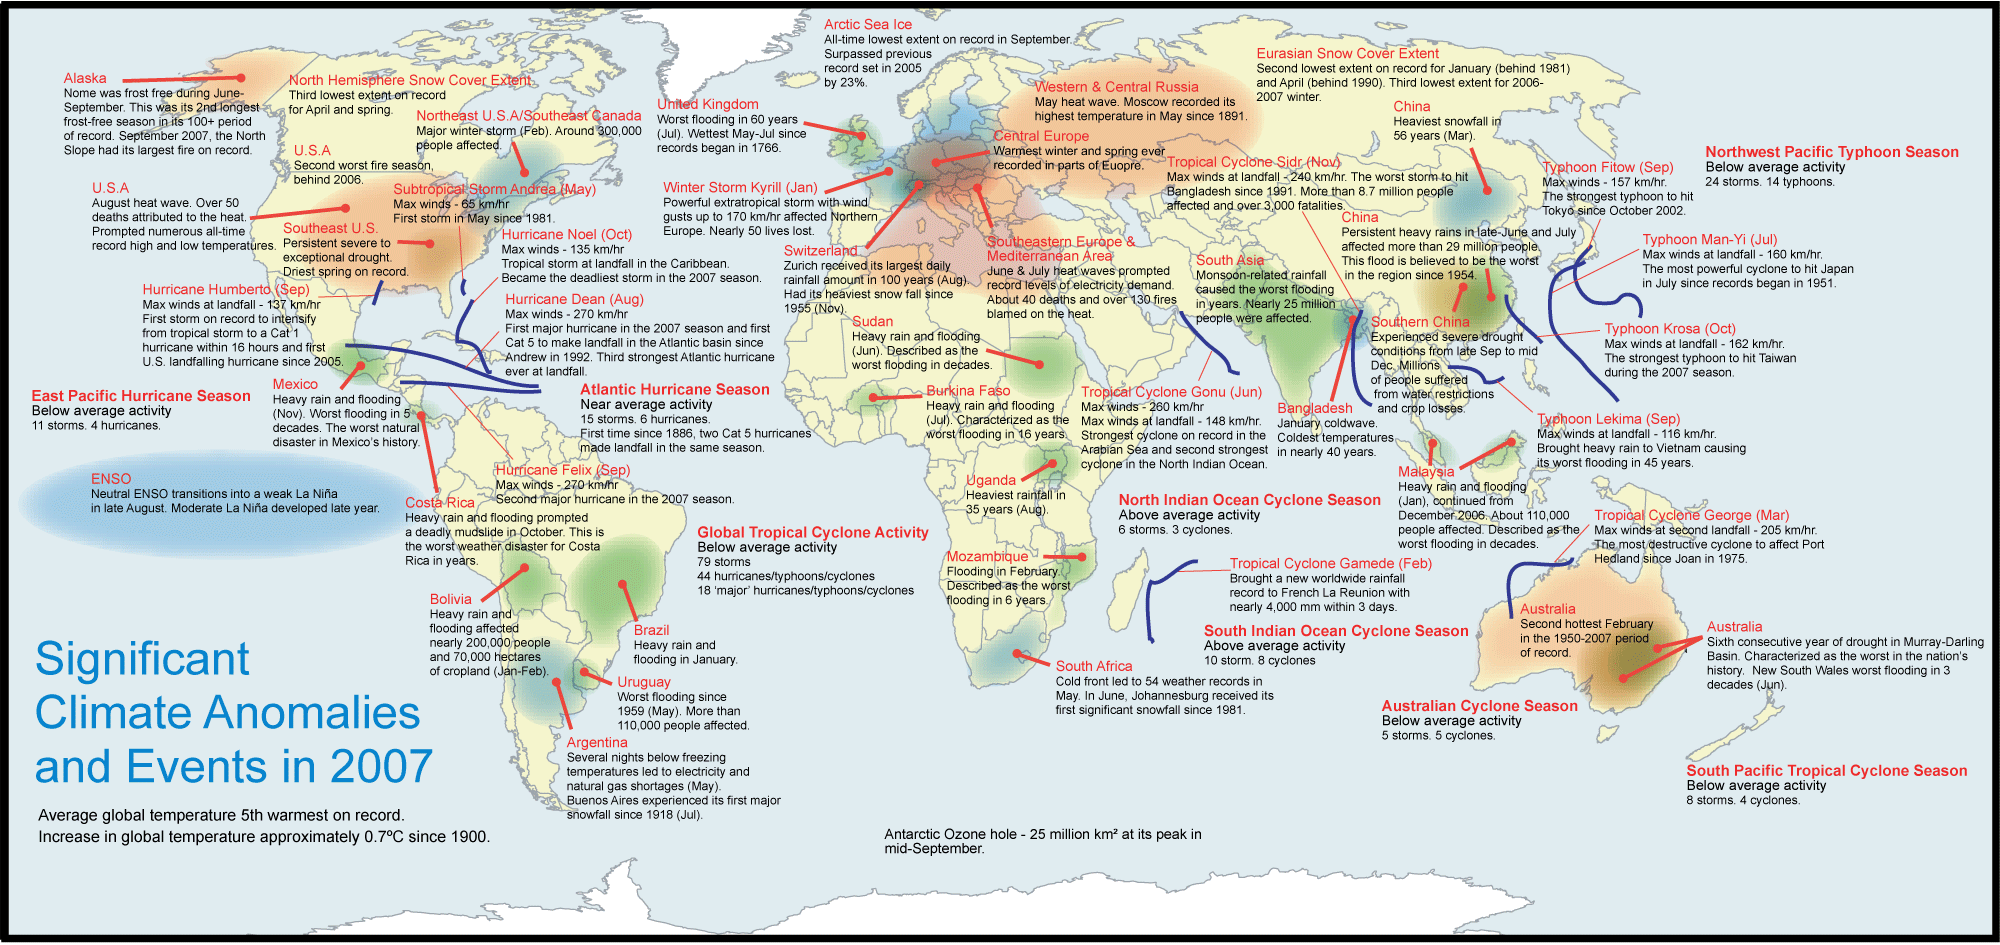 Significant Climate Anomalies and Events in 2007